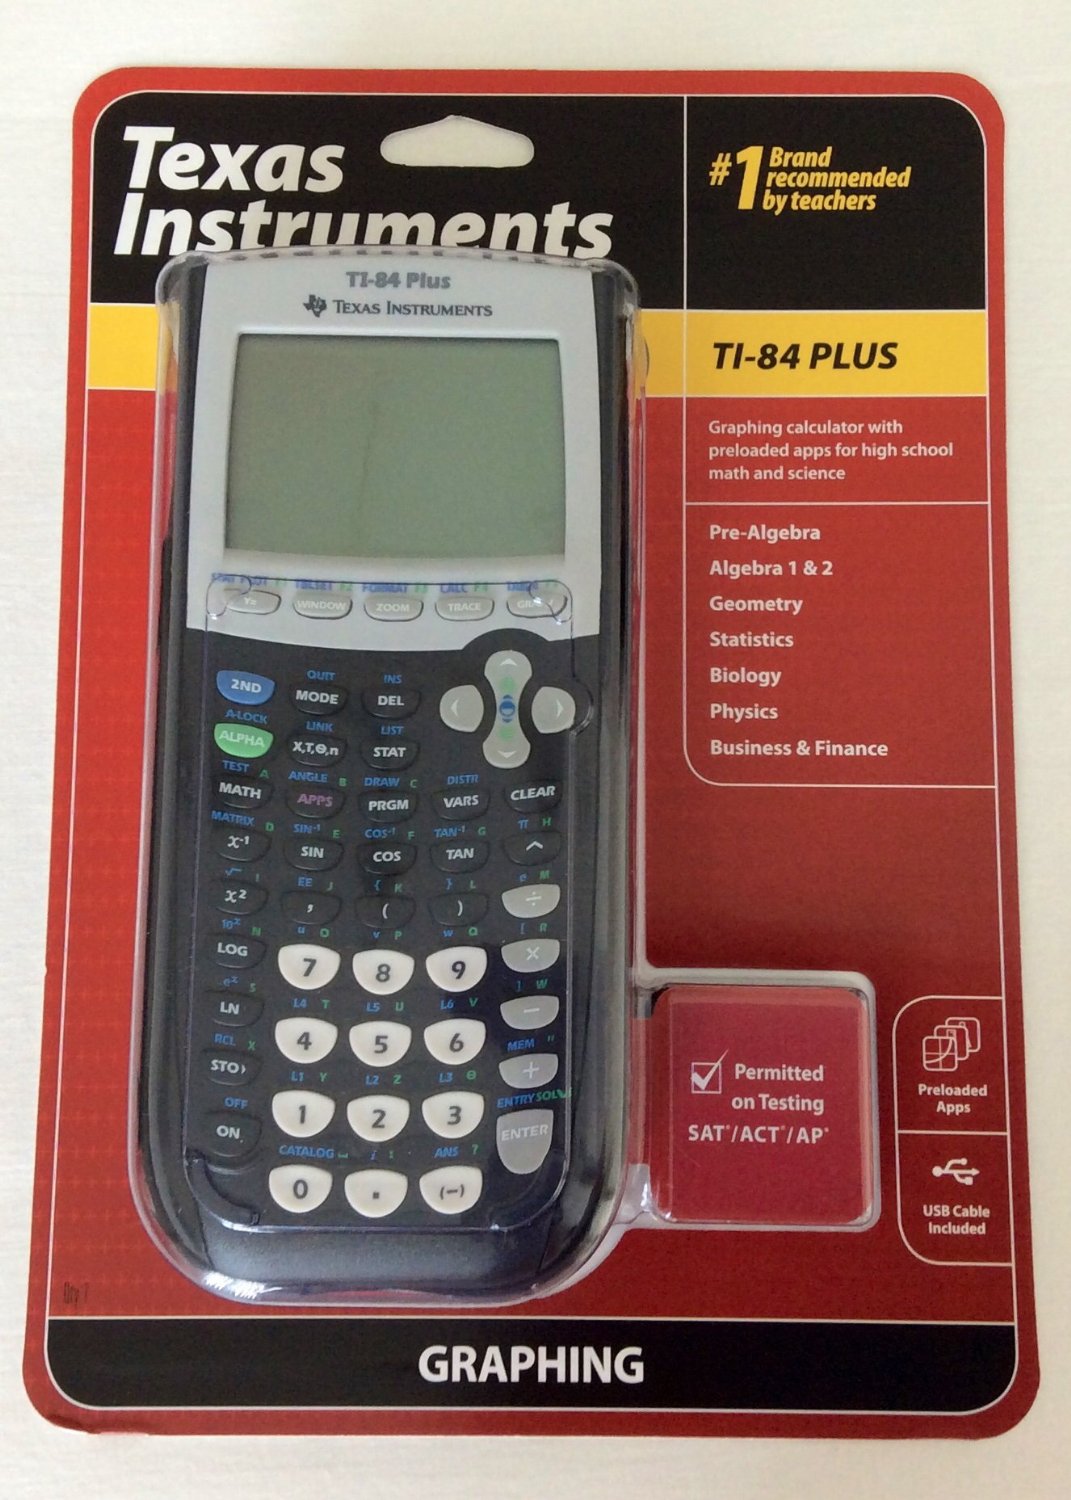 Calculadora Marco: Texas Instruments Modelo: INST TI-84 Plus Graphing.